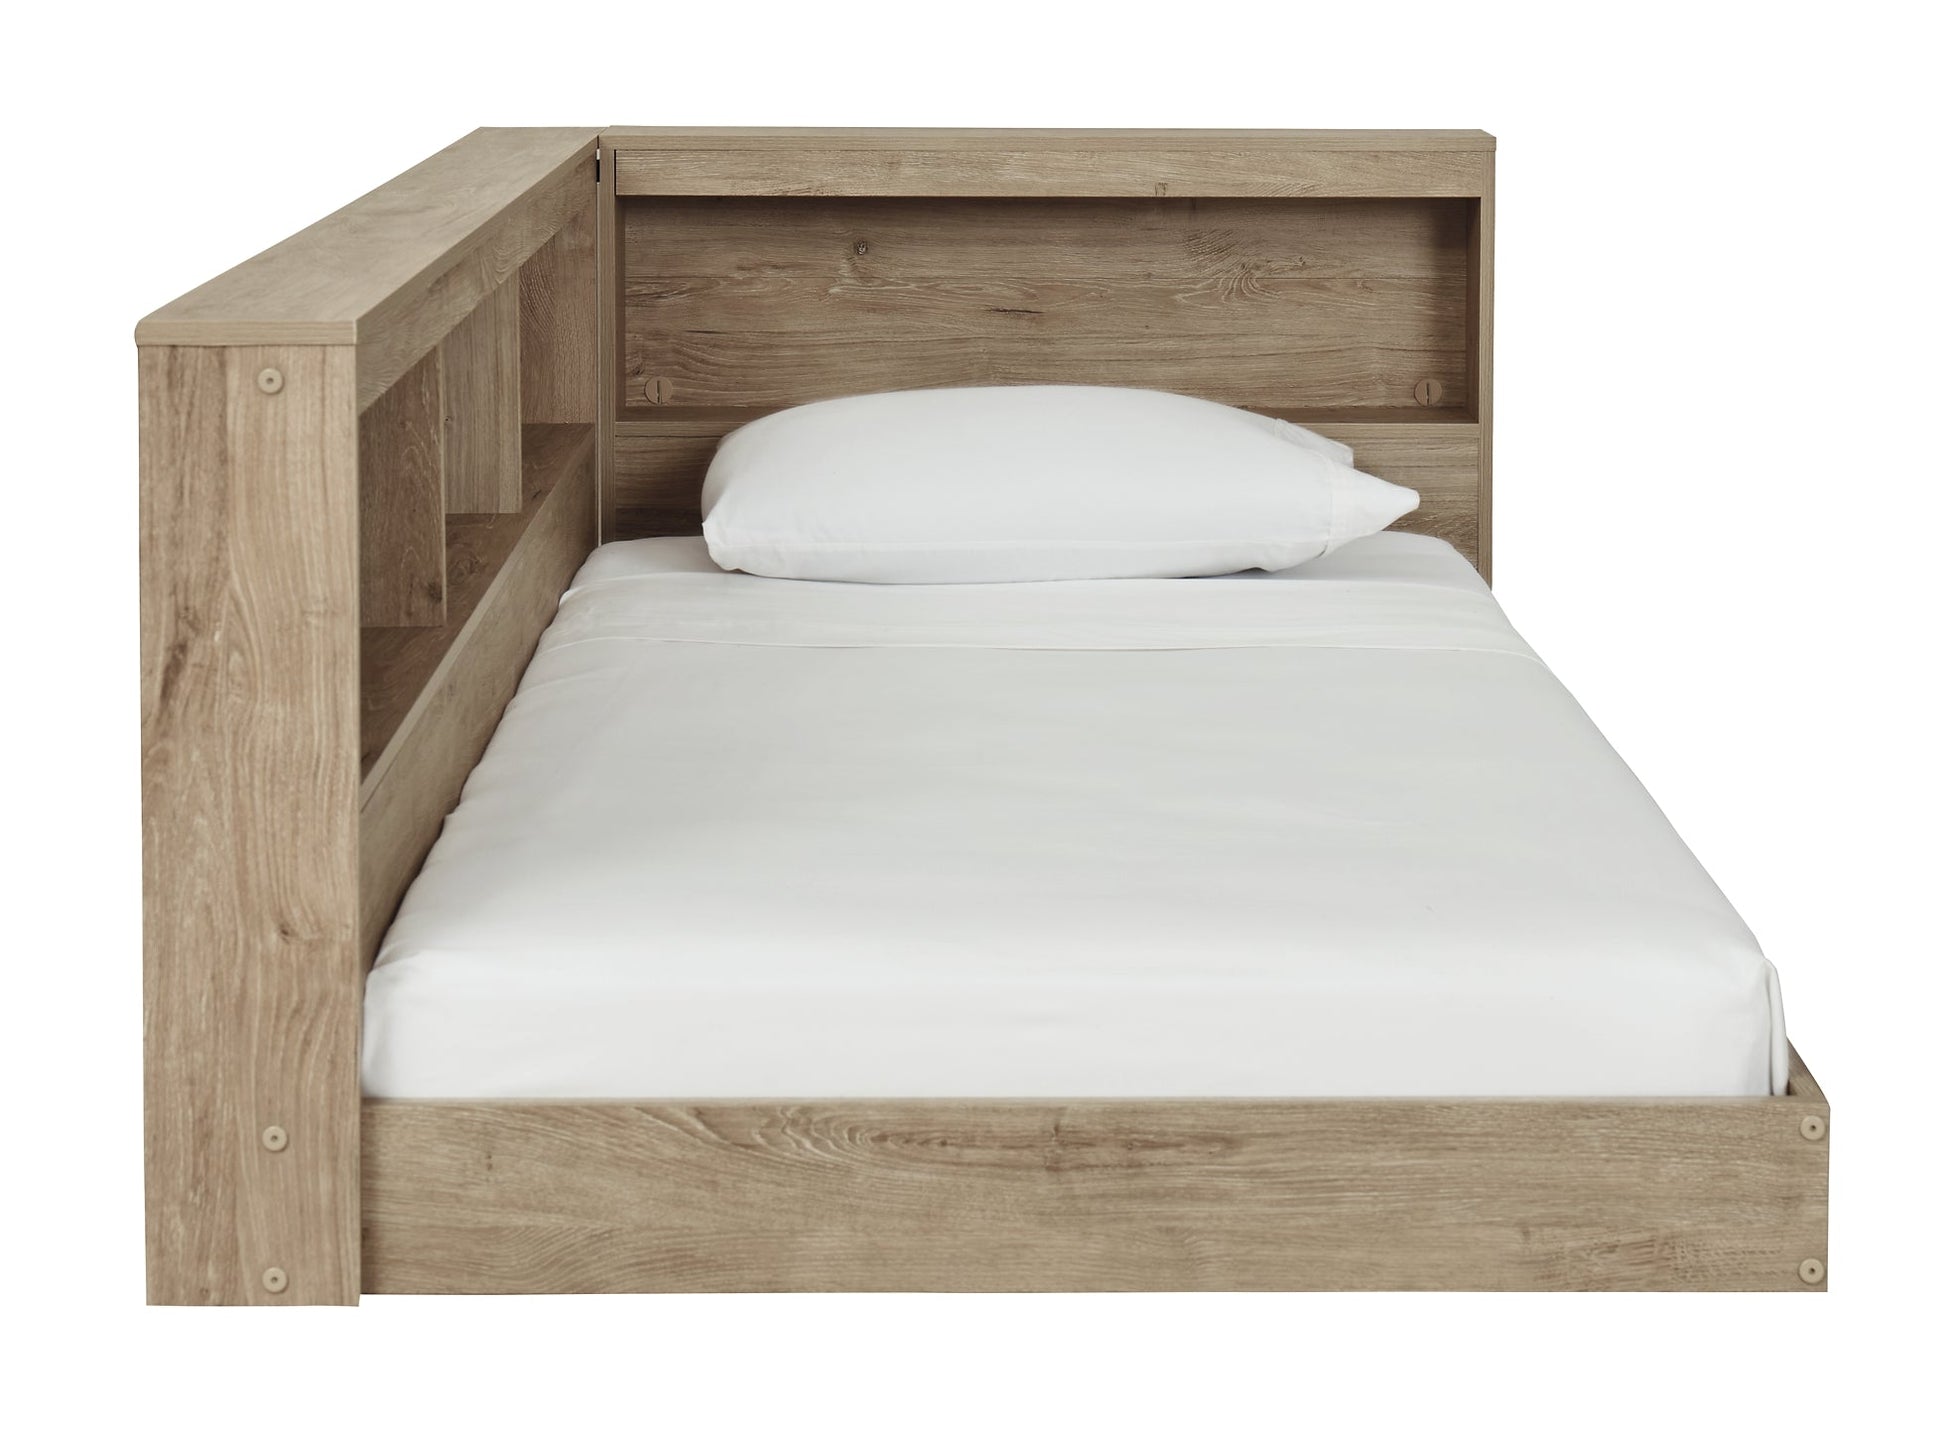 Oliah Twin Bookcase Storage Bed Smyrna Furniture Outlet